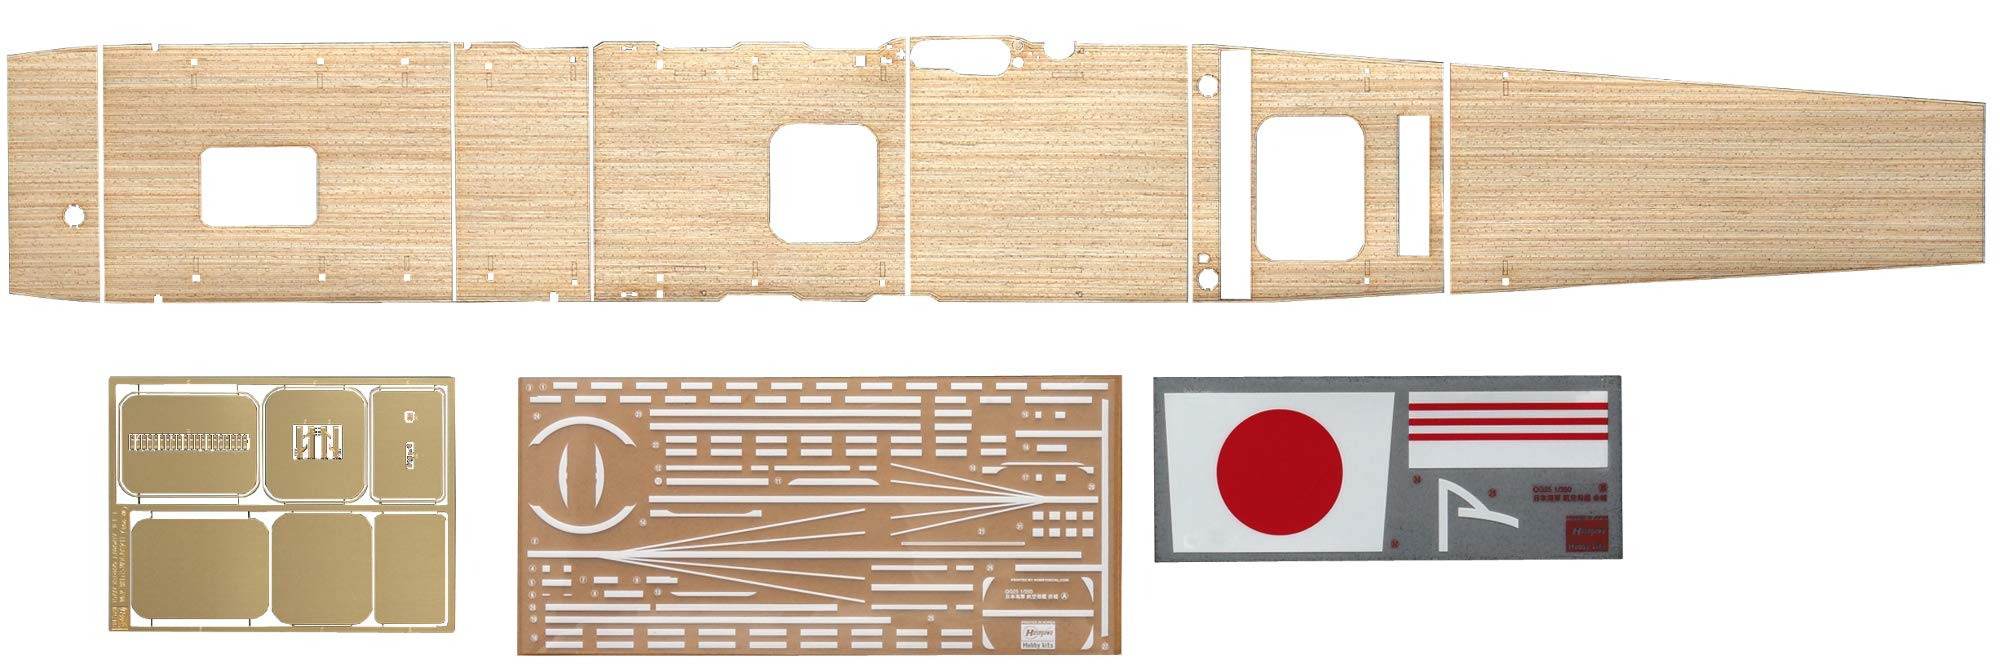 HASEGAWA Qg25 721258 Wooden Deck Parts For Aircraft Carrier Akagi 1/350 Scale